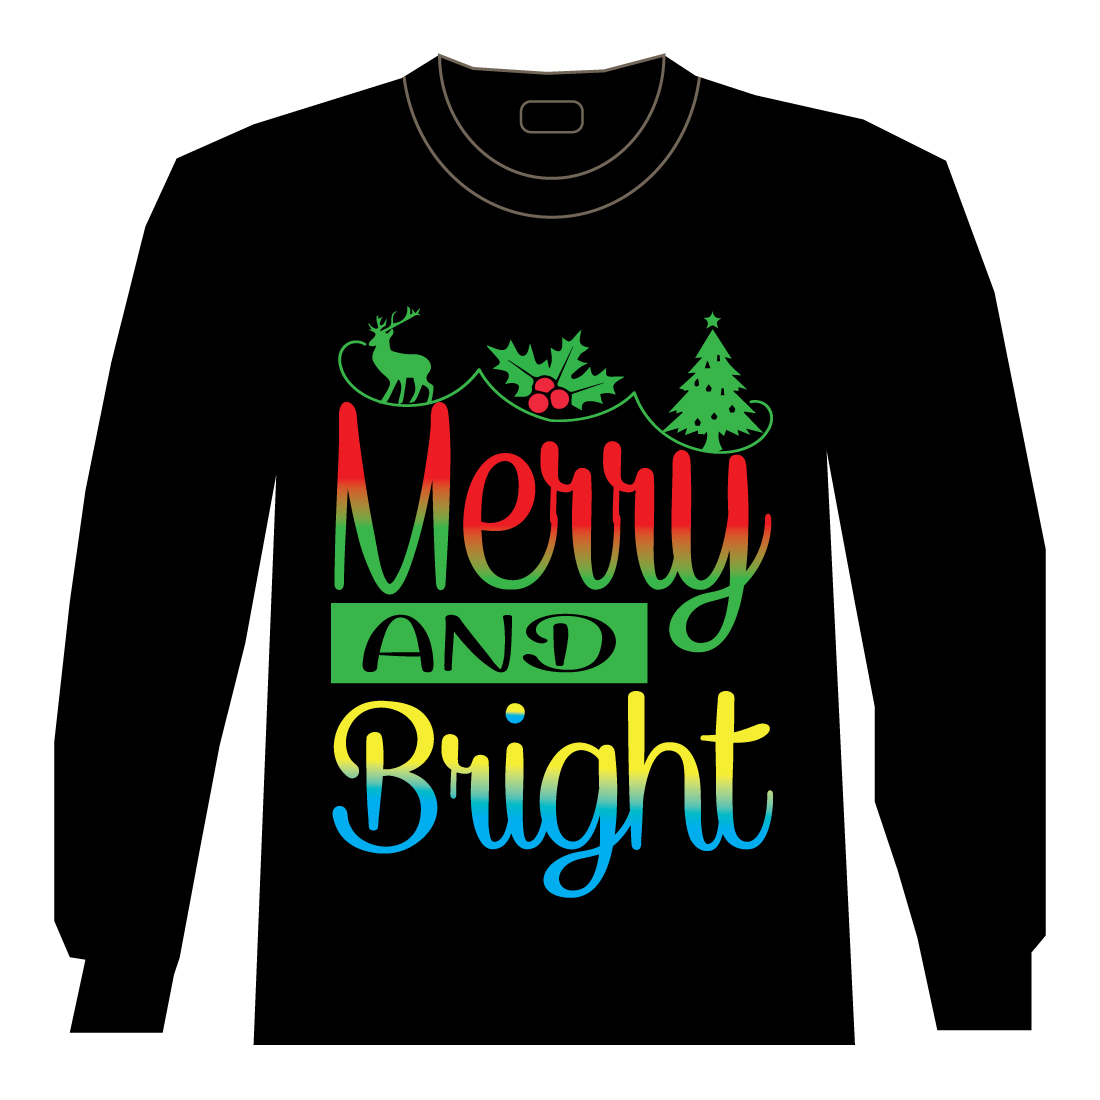 Christmas Merry and Bright T-Shirt Design cover image.